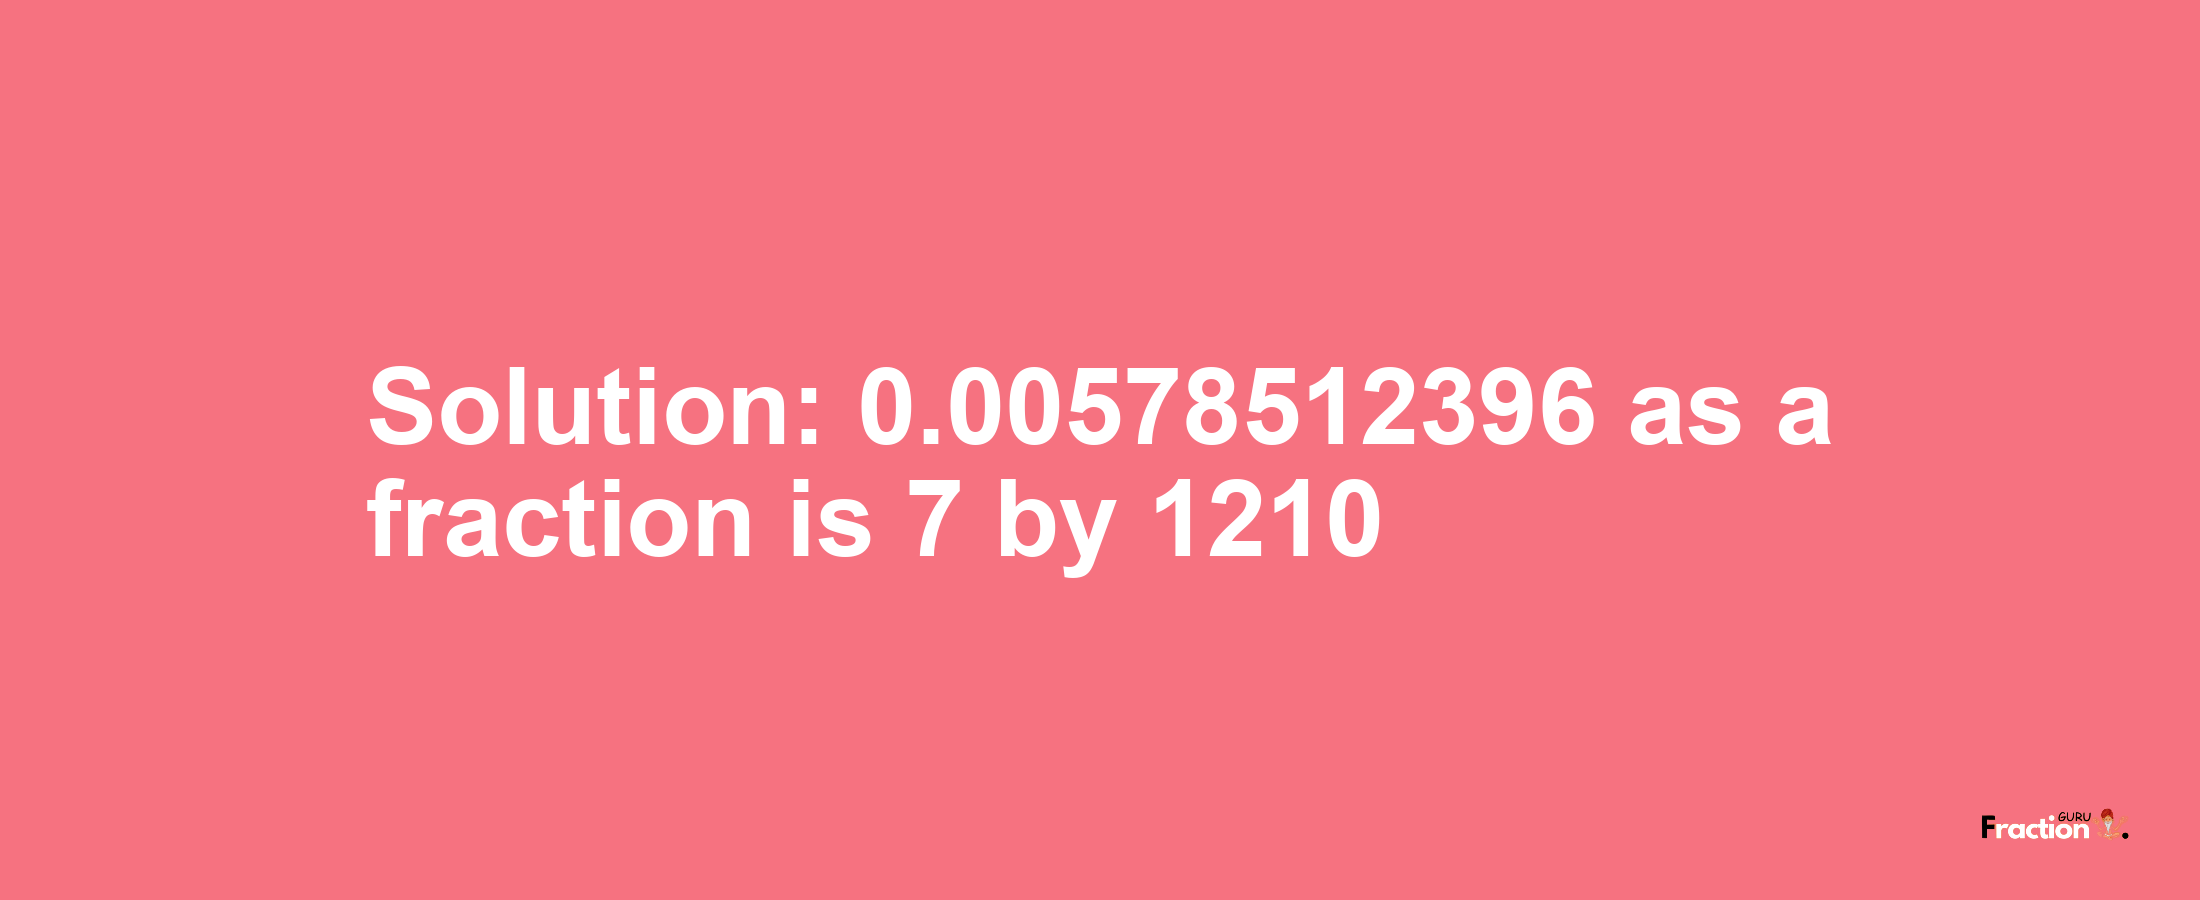 Solution:0.00578512396 as a fraction is 7/1210